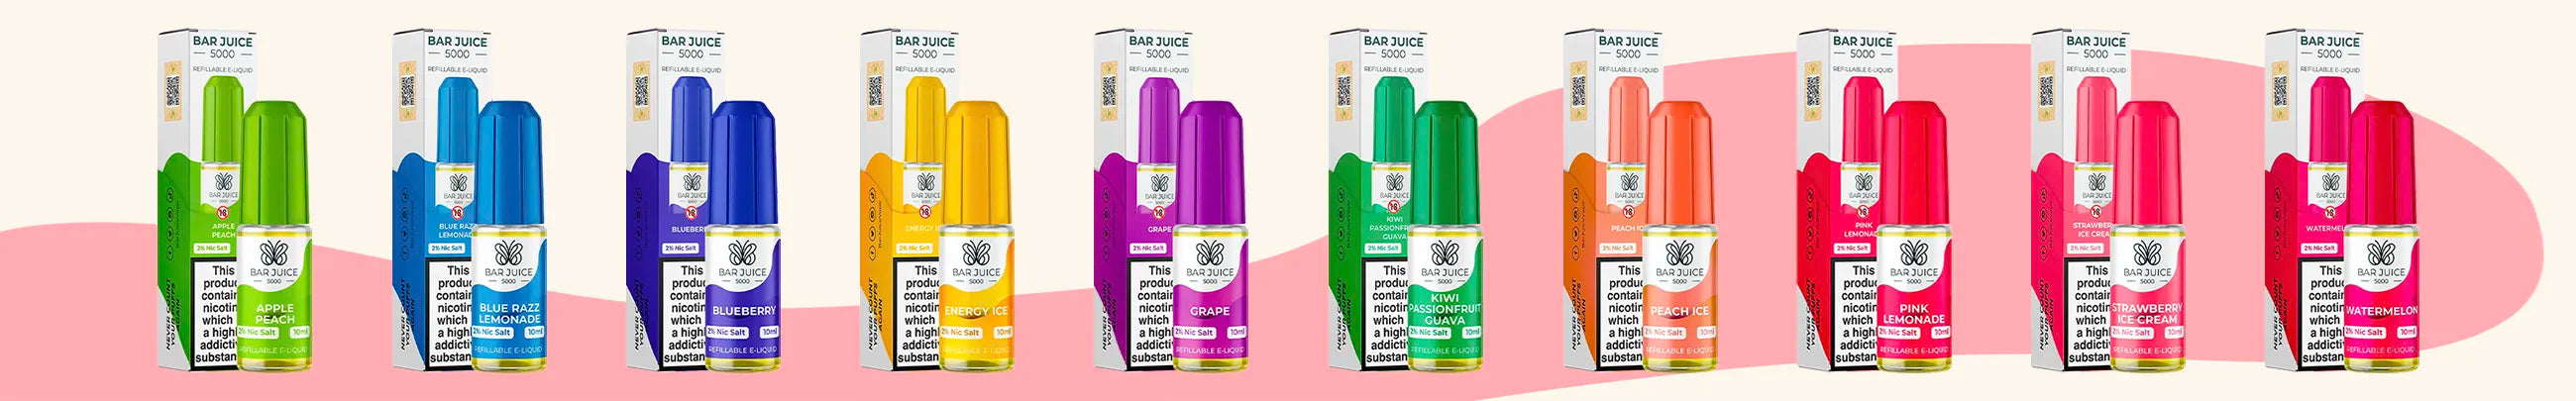 Bar Juice 5000 use only the best ingredients in their 10ml ELiquid vape juices for you and for the planet, so you can feel good whilst satisfying your cravings.